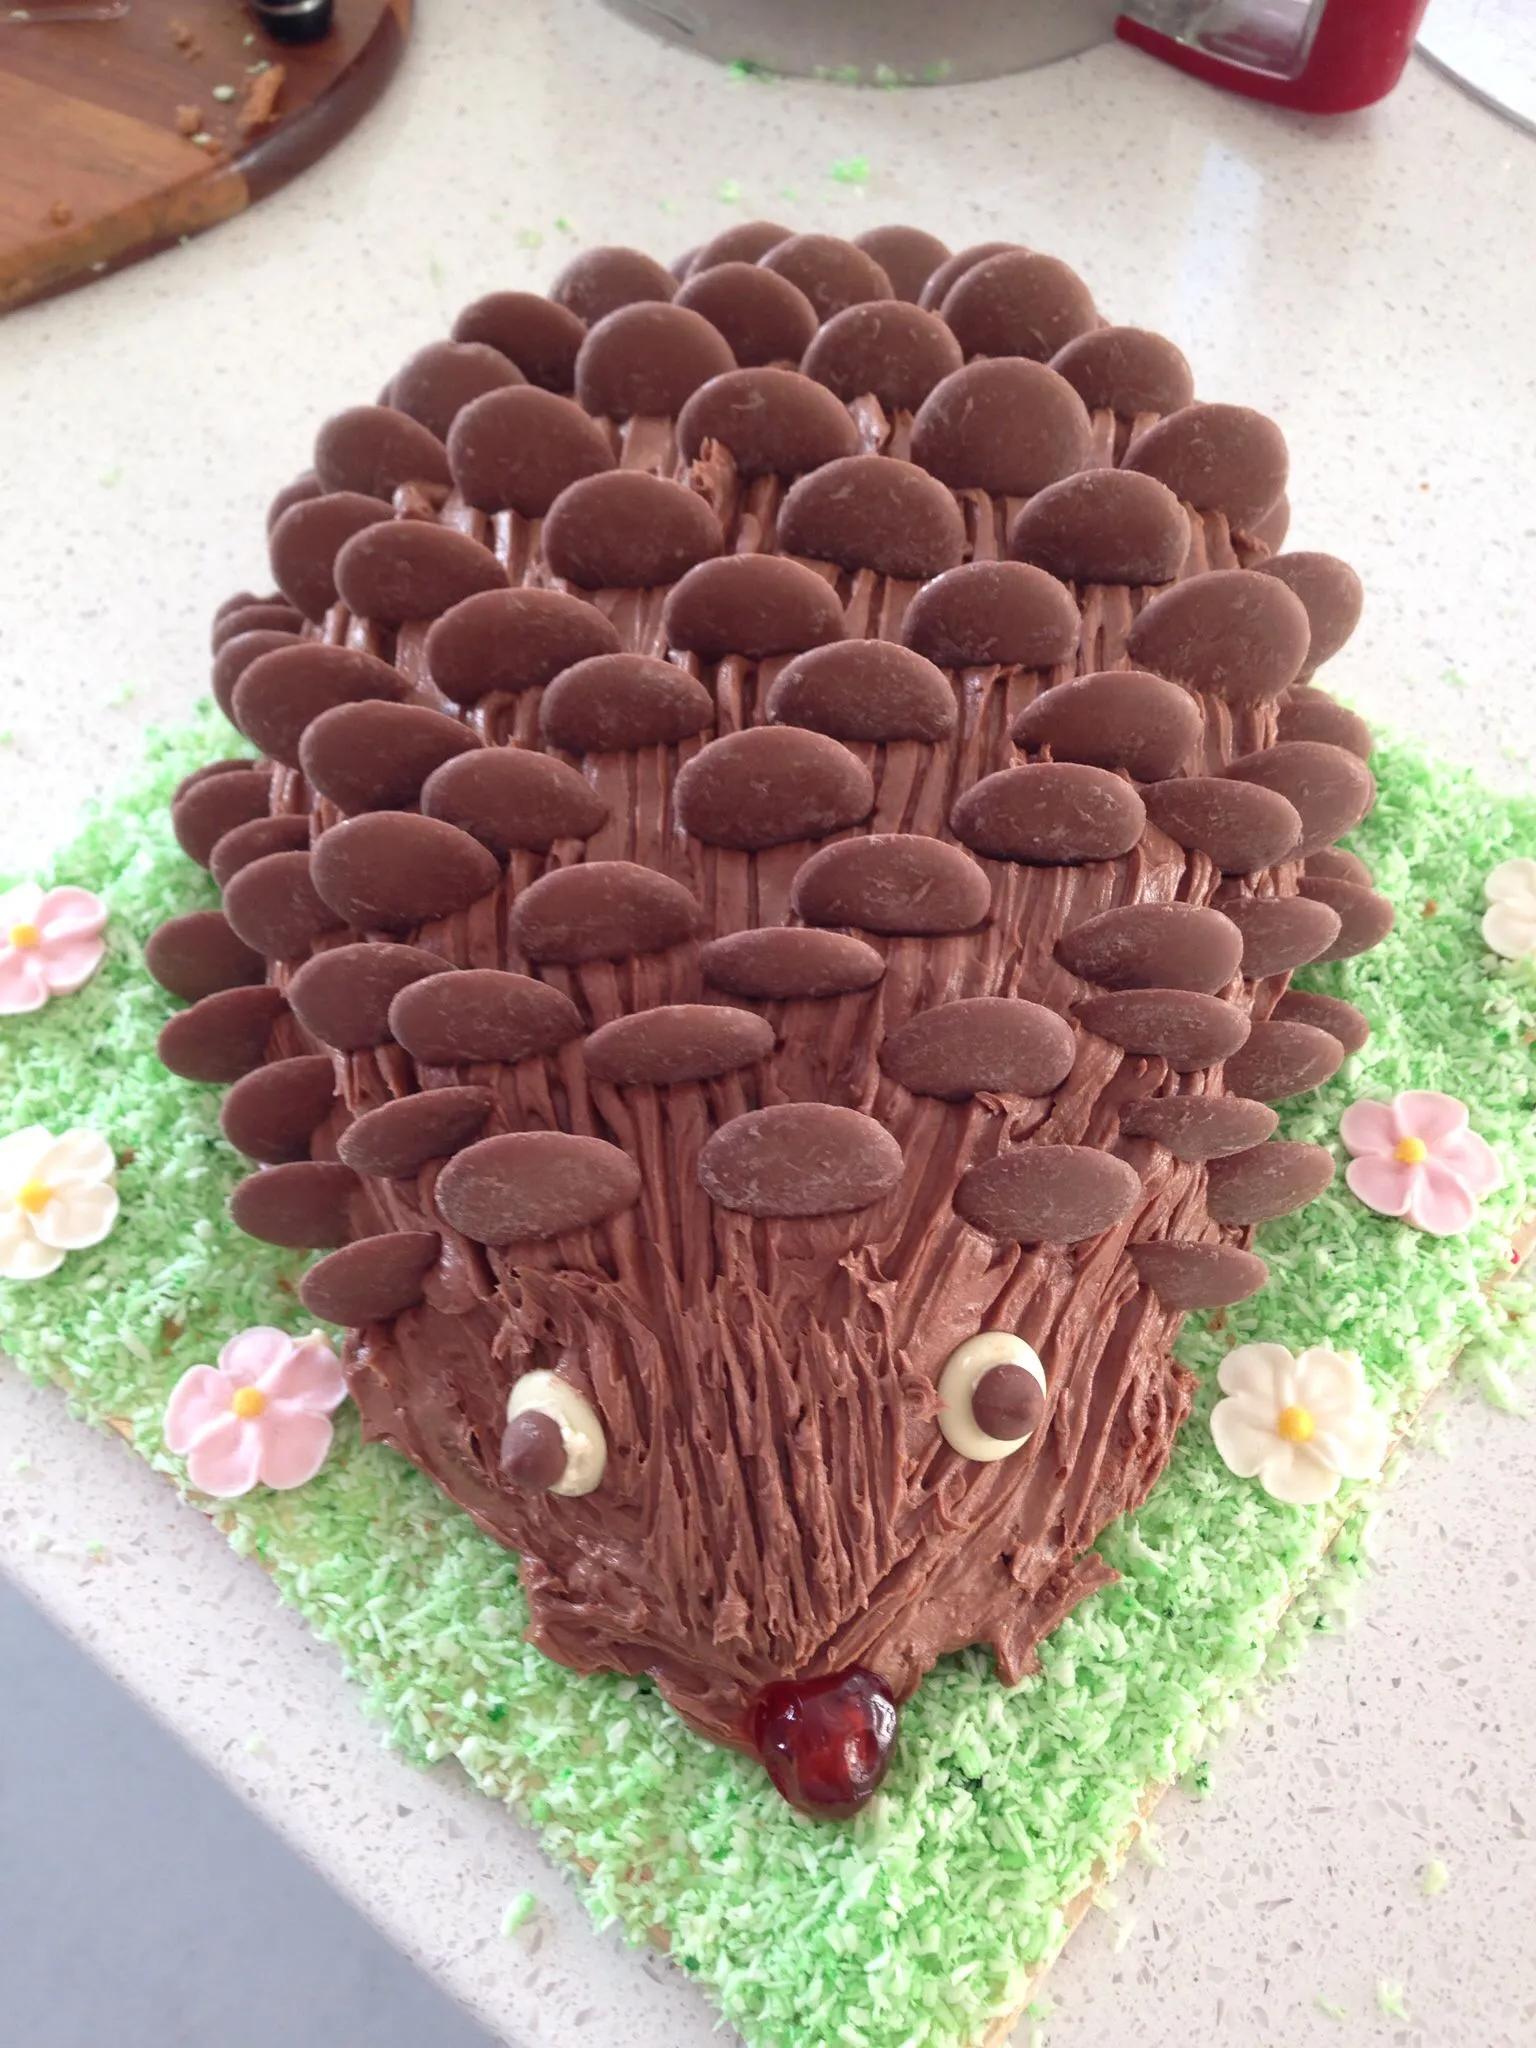 Pin on Hedgehog cakes